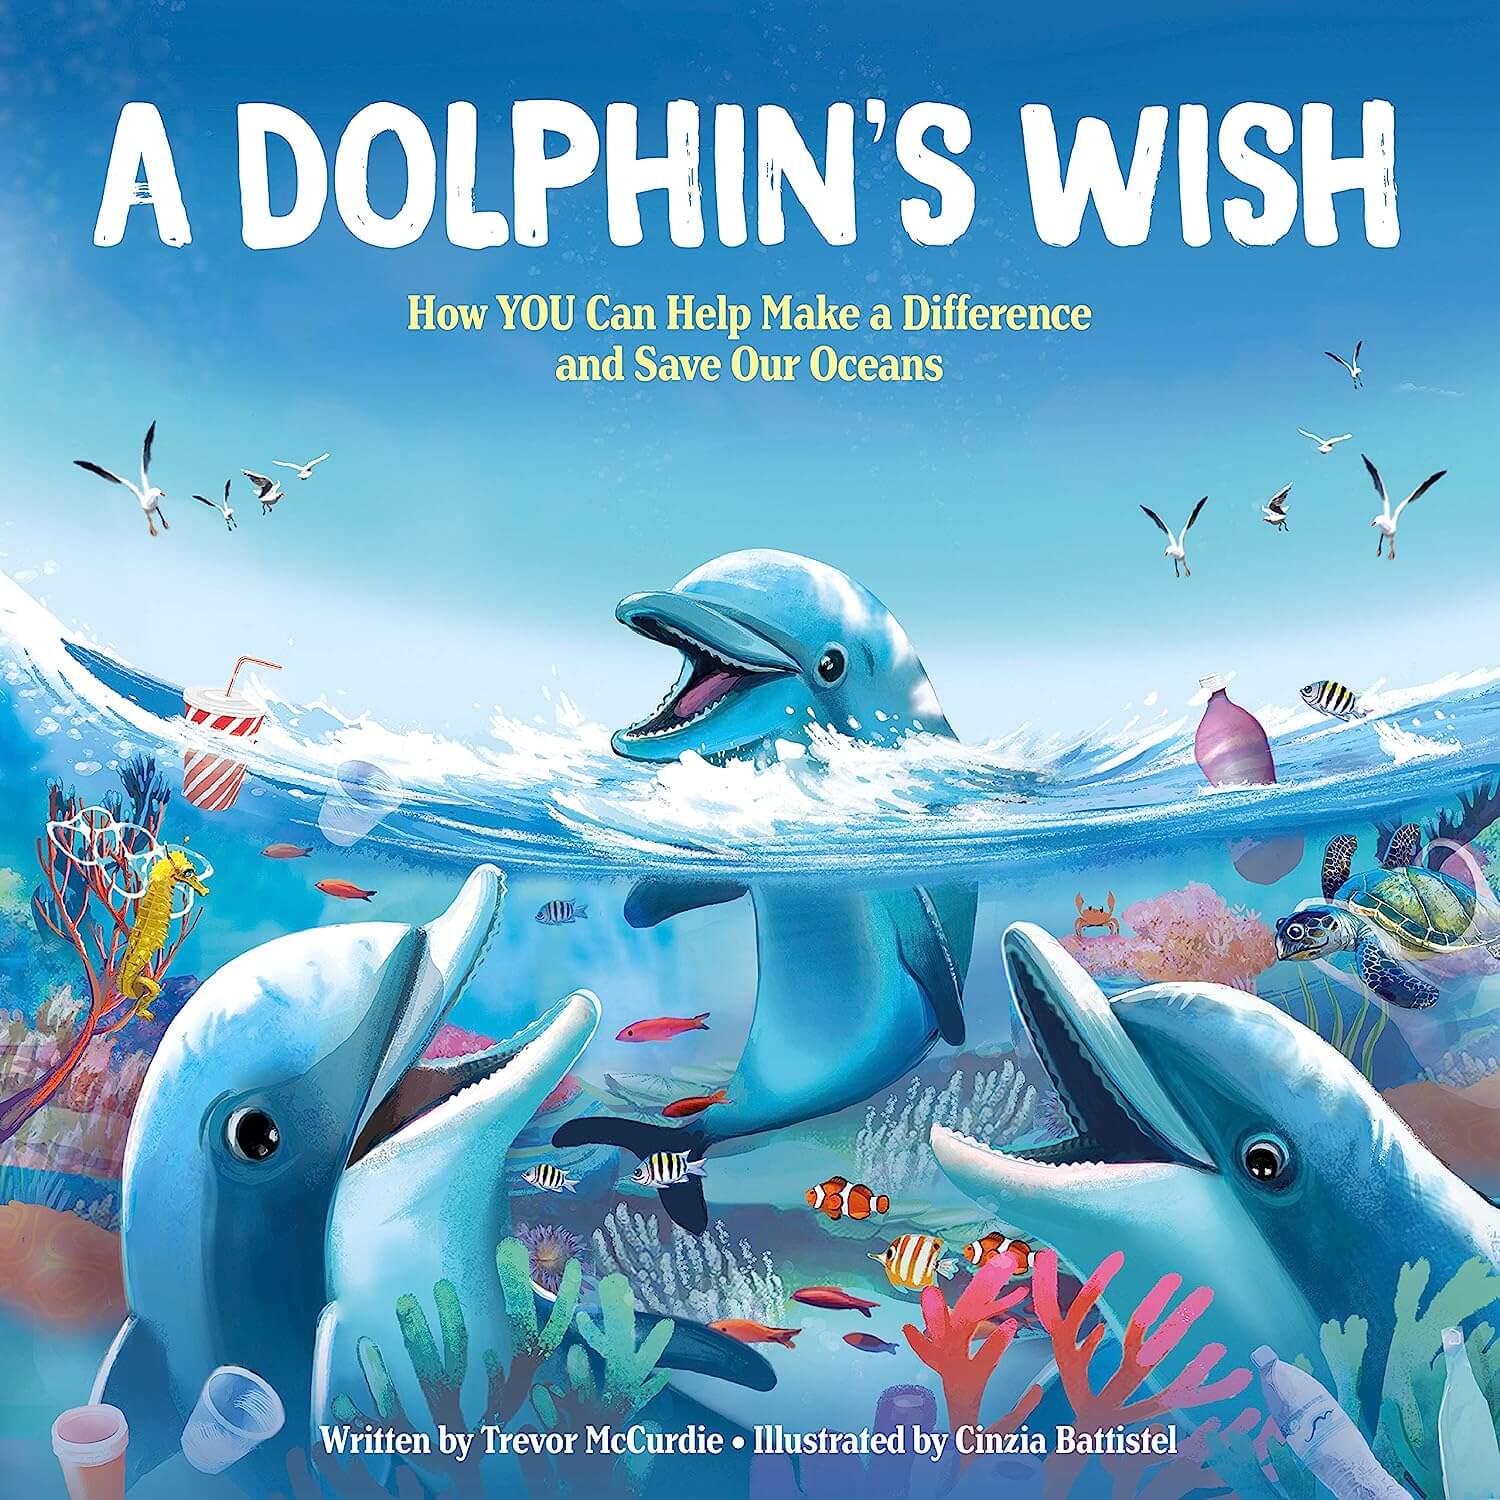 A dolphin's wish: How you can help make a difference and save our oceans by Trevor McCurdie 